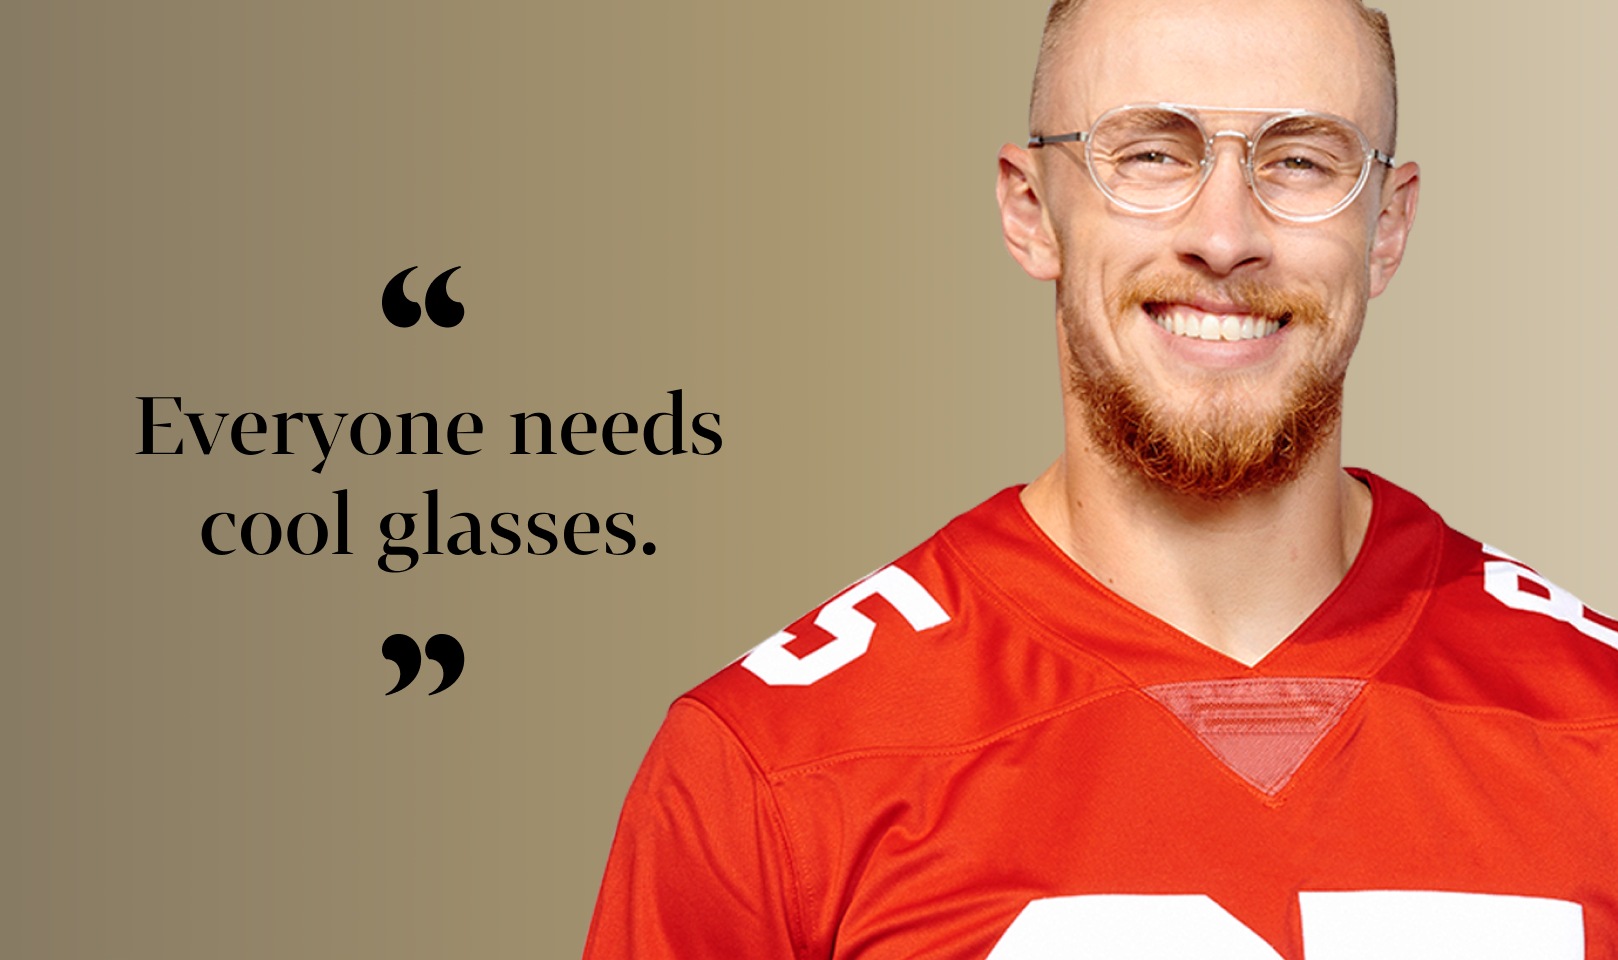 ‘Everyone needs cool glasses.’ George Kittle, wearing Zenni hawkeyes aviator glasses #1150423, in front of a gold background.